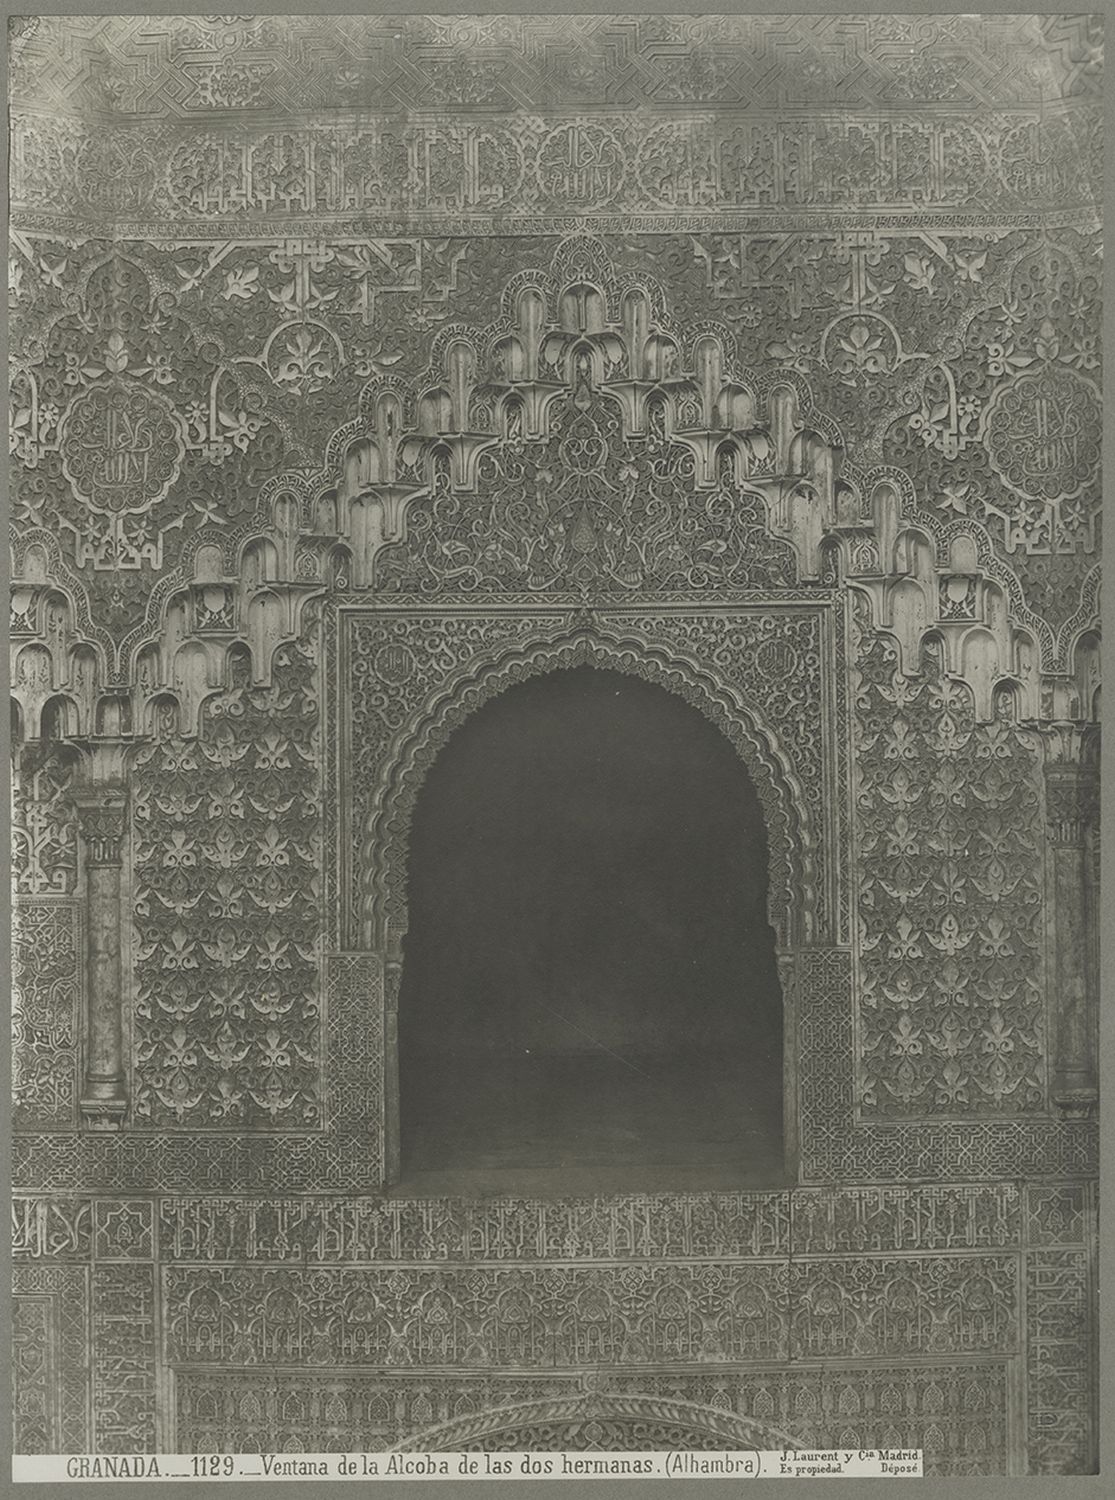 View of a window and carved stucco decoration.